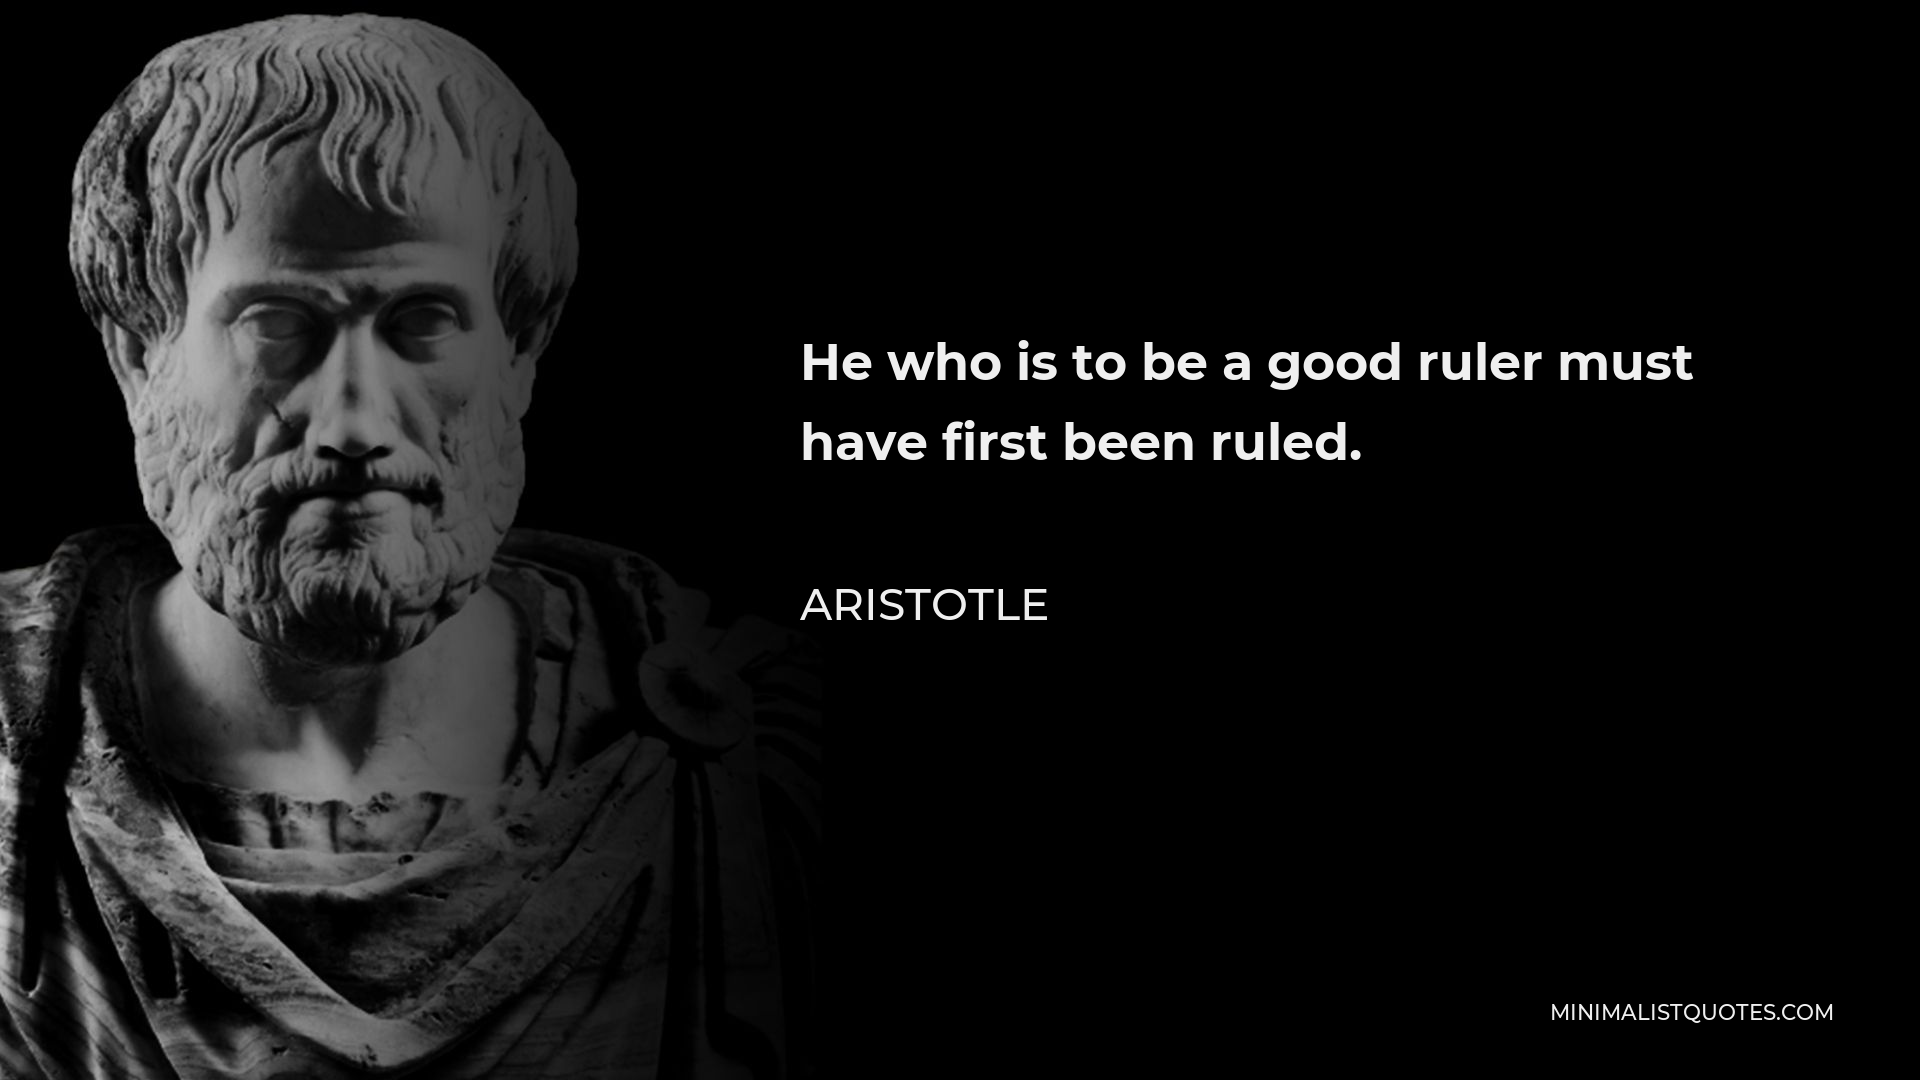 Aristotle Quote - He who is to be a good ruler must have first been ruled.